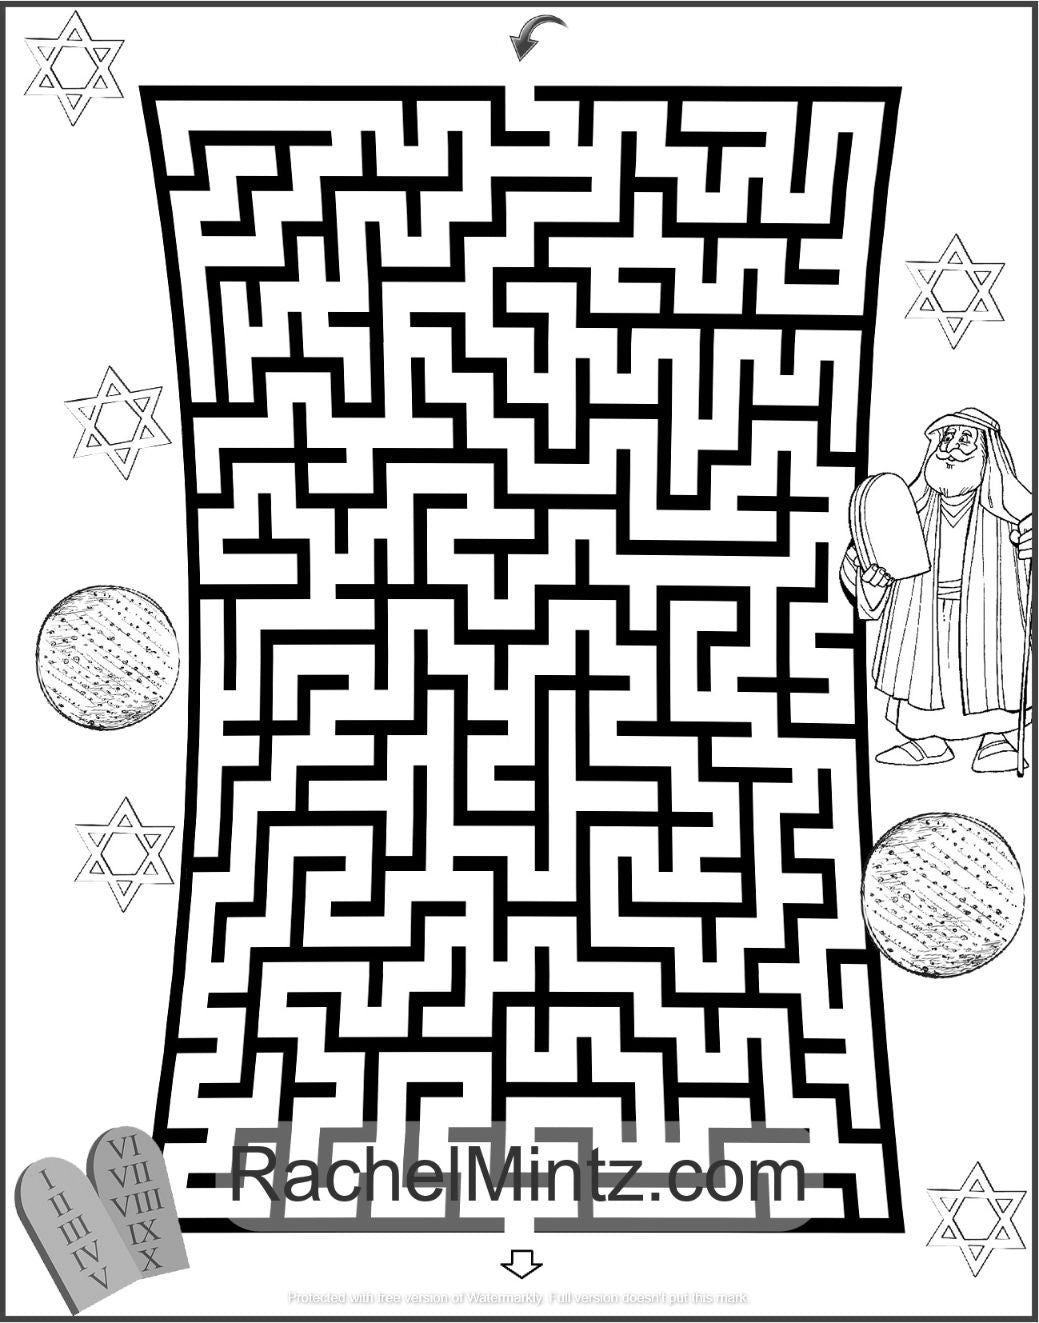 50 Passover Mazes - Activity Pages For Pesch, Seder Activity For Kids and Adults (PDF Format)